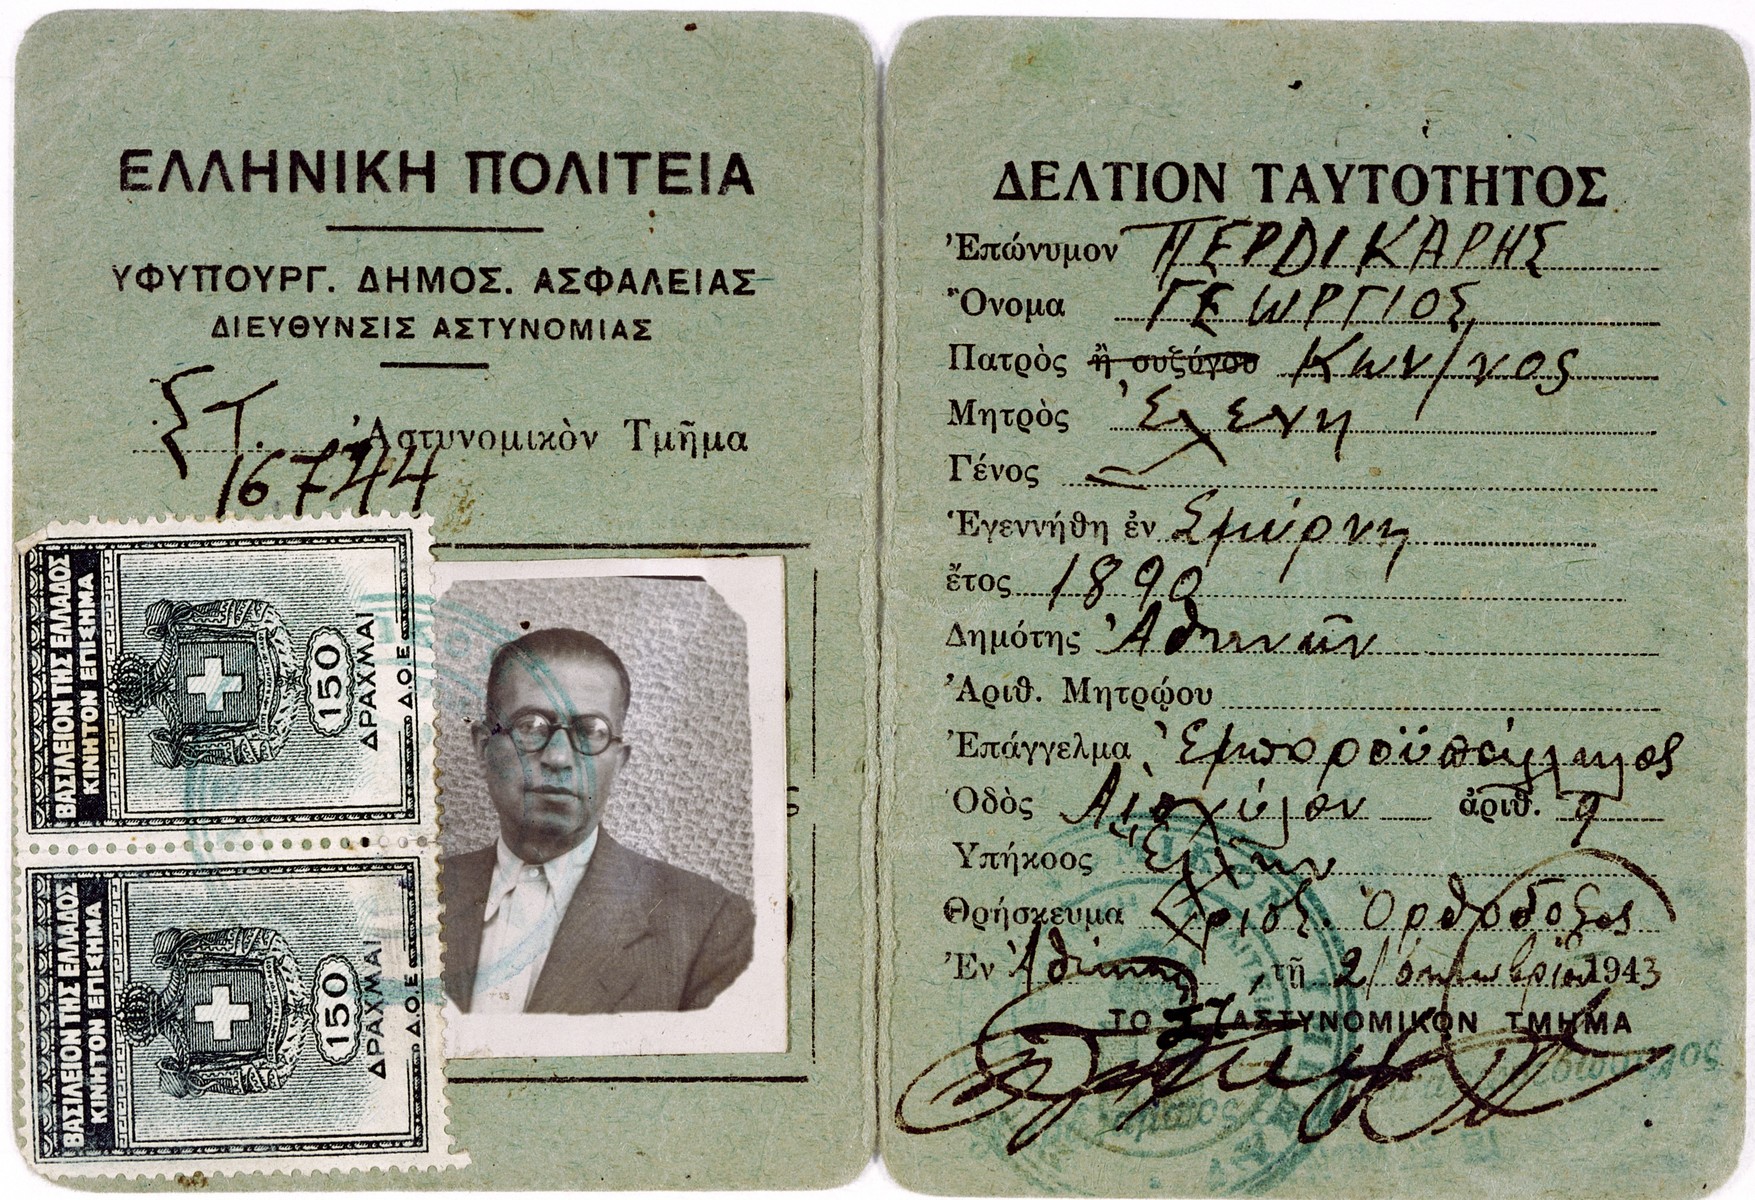 False identification papers used by Salomon Levy while living in hiding in Athens during the German occupation.

The card was issued in the name of George Perdikaris, identified as a member of the Greek Orthodox church who was born in Smirna, Turkey.